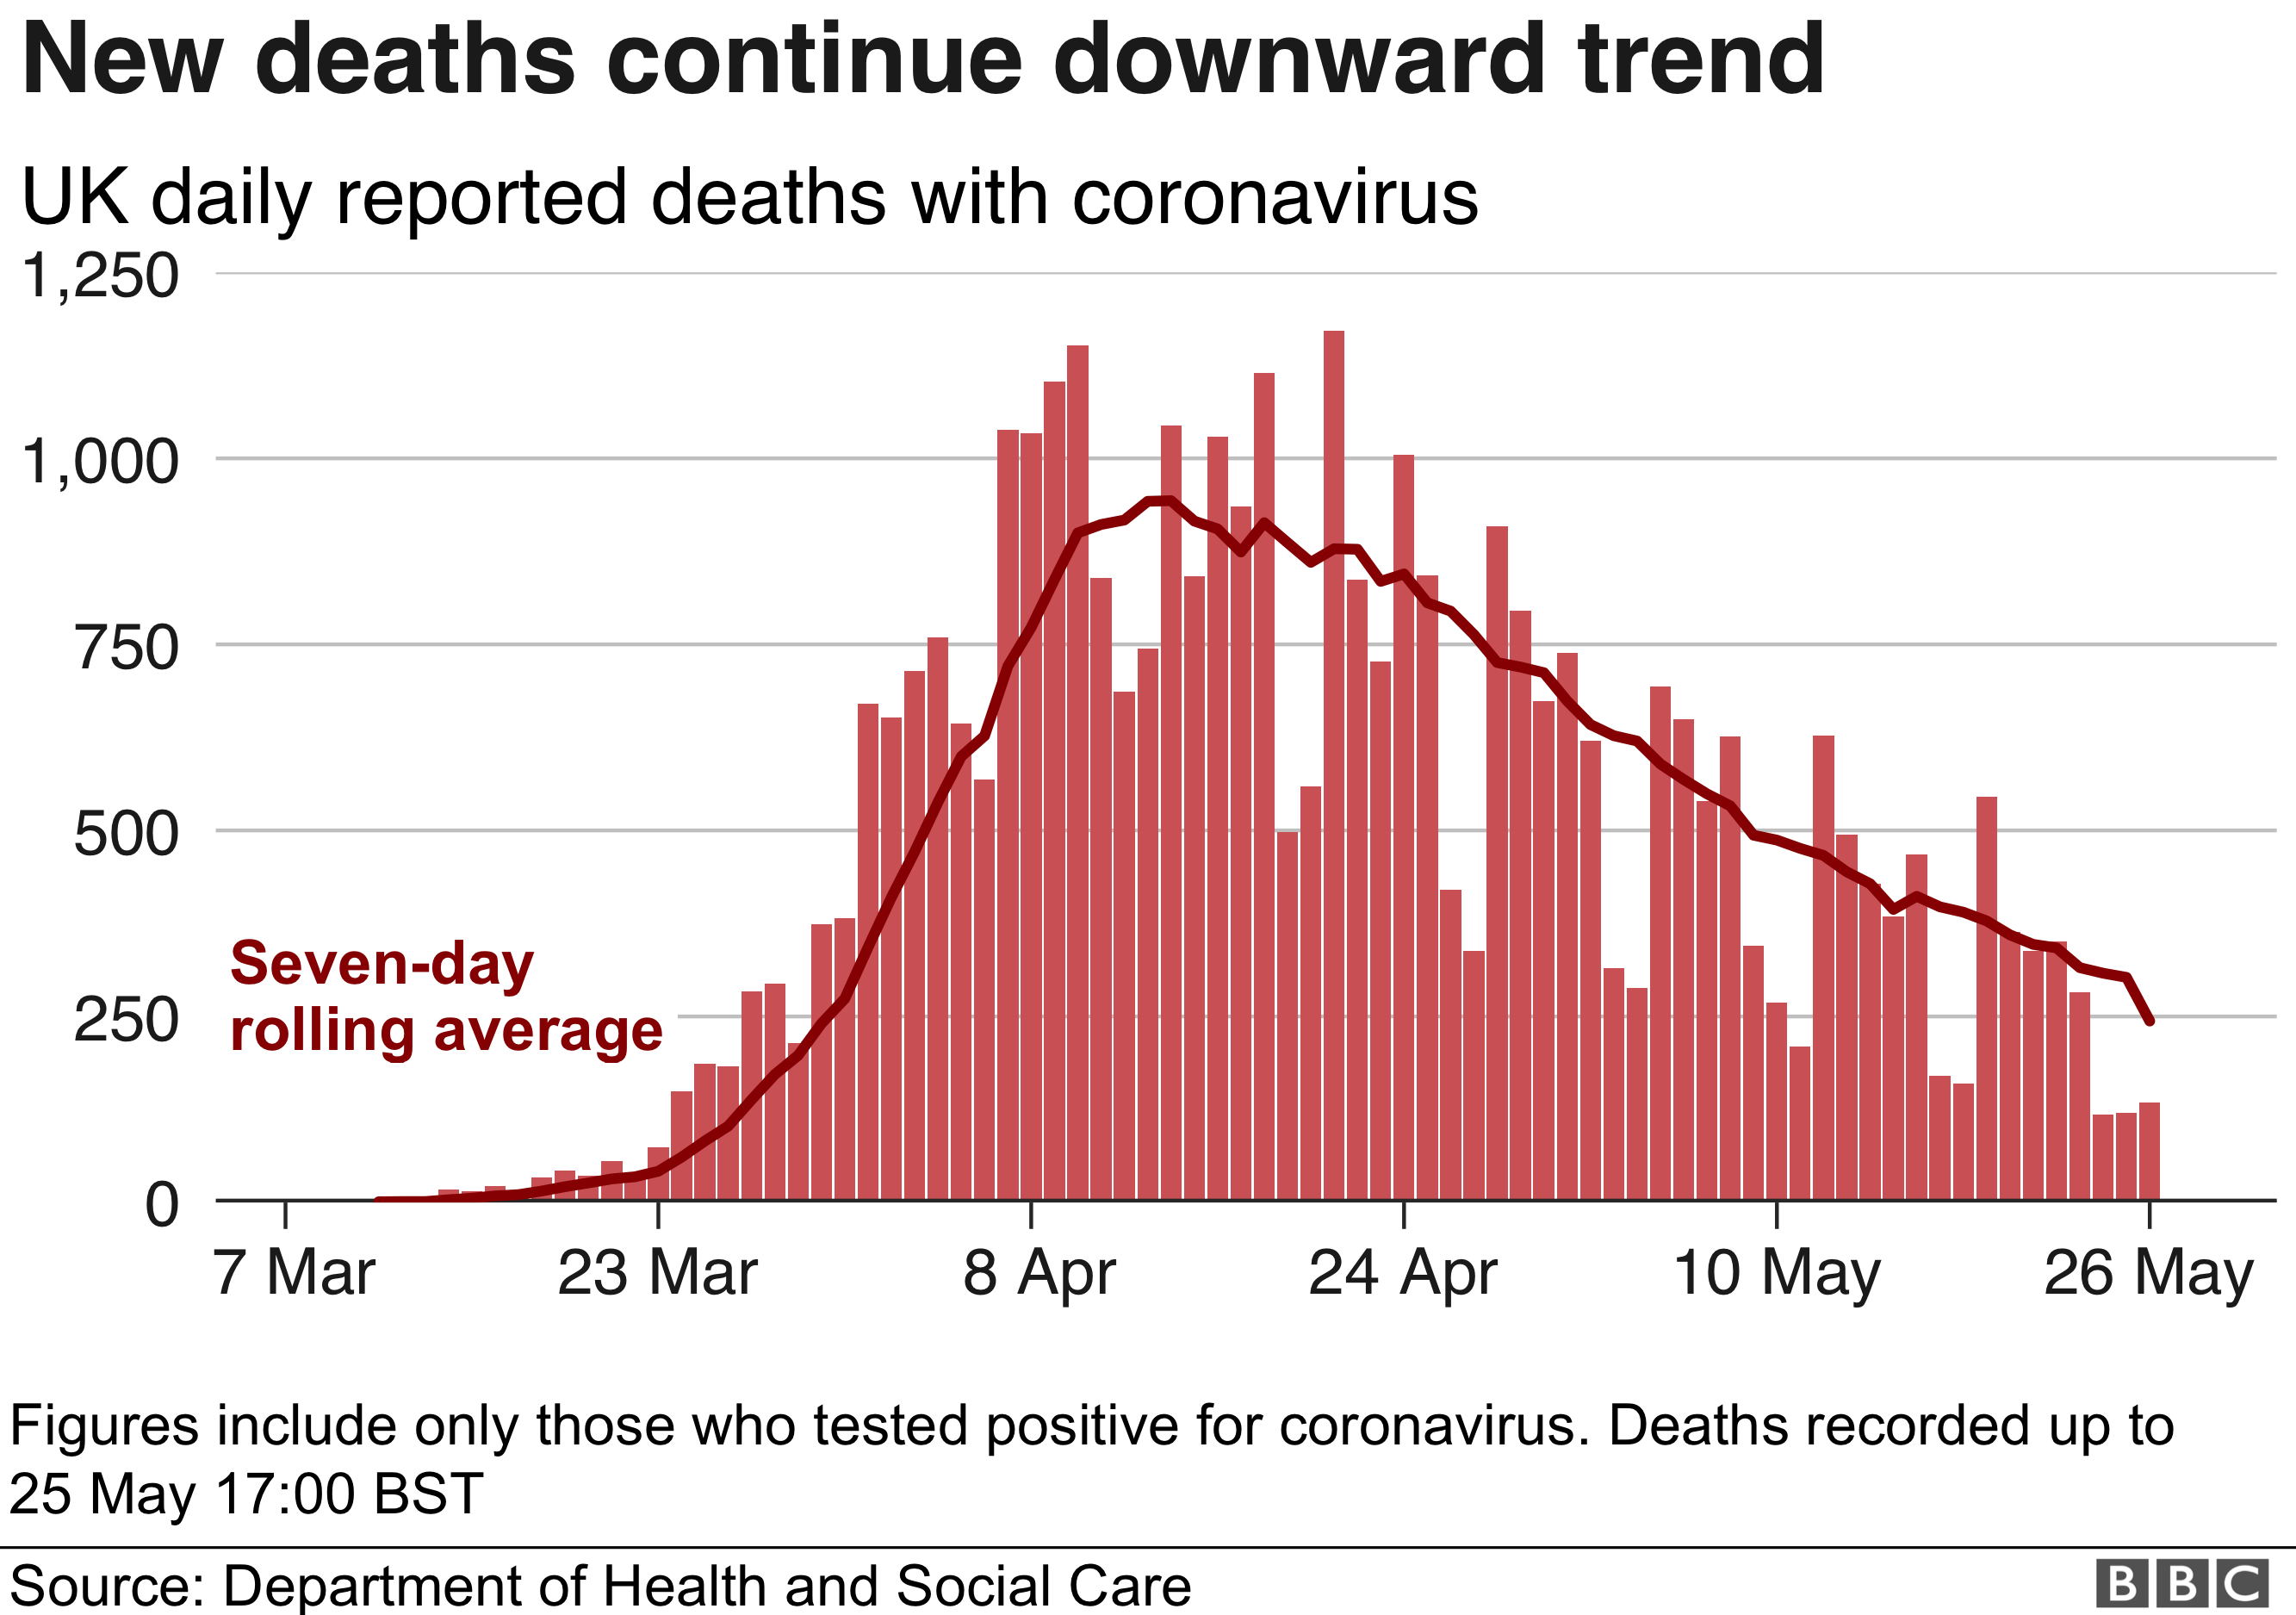 Chart showing UK daily death toll